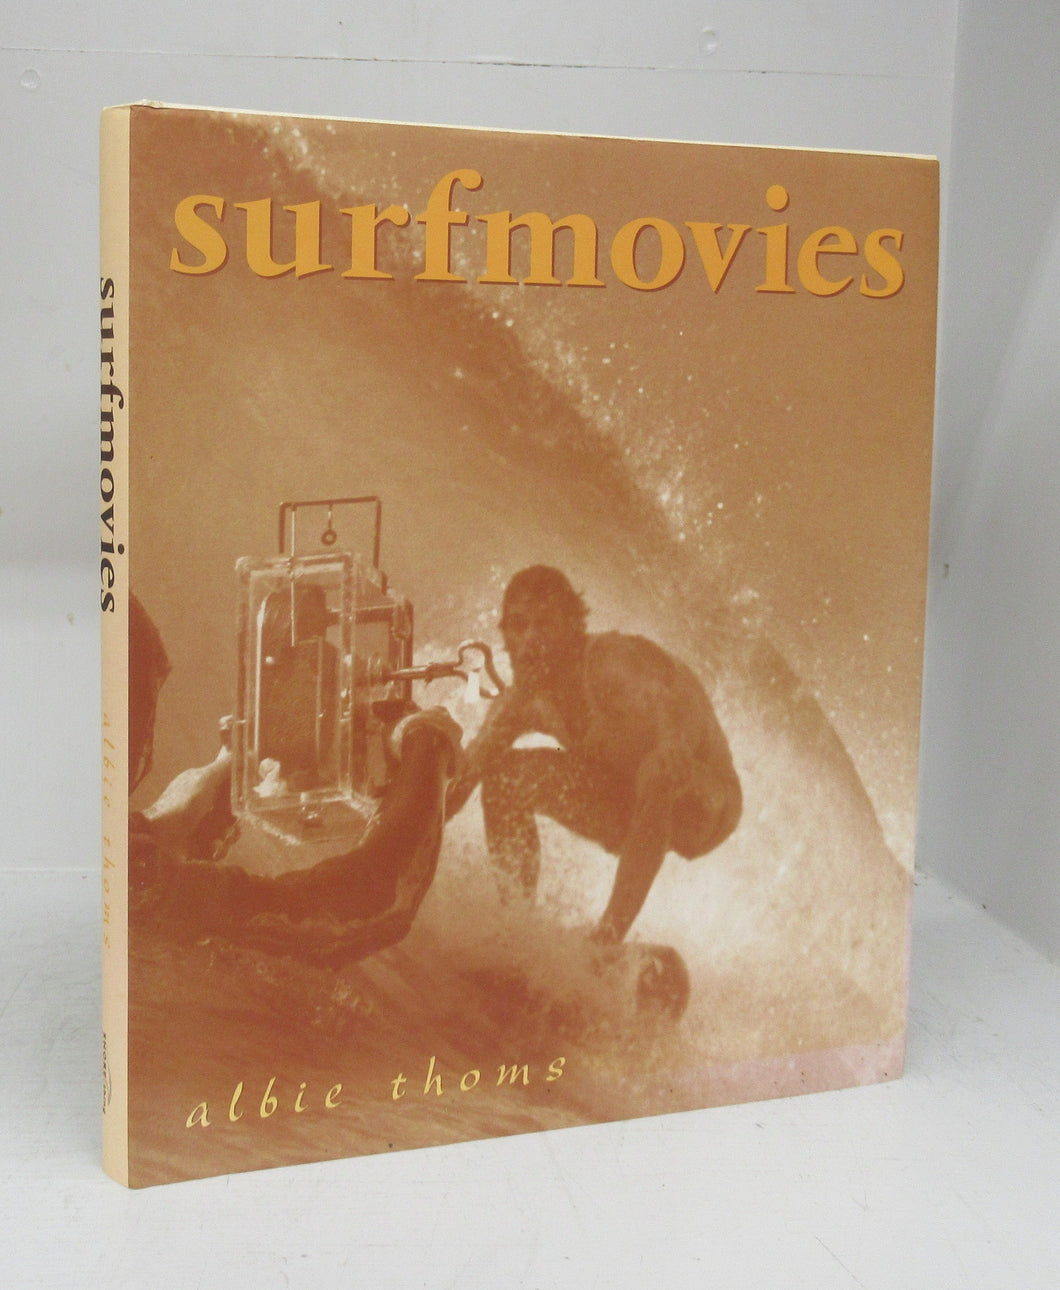 surfmovies: the history of the surf film in Australia